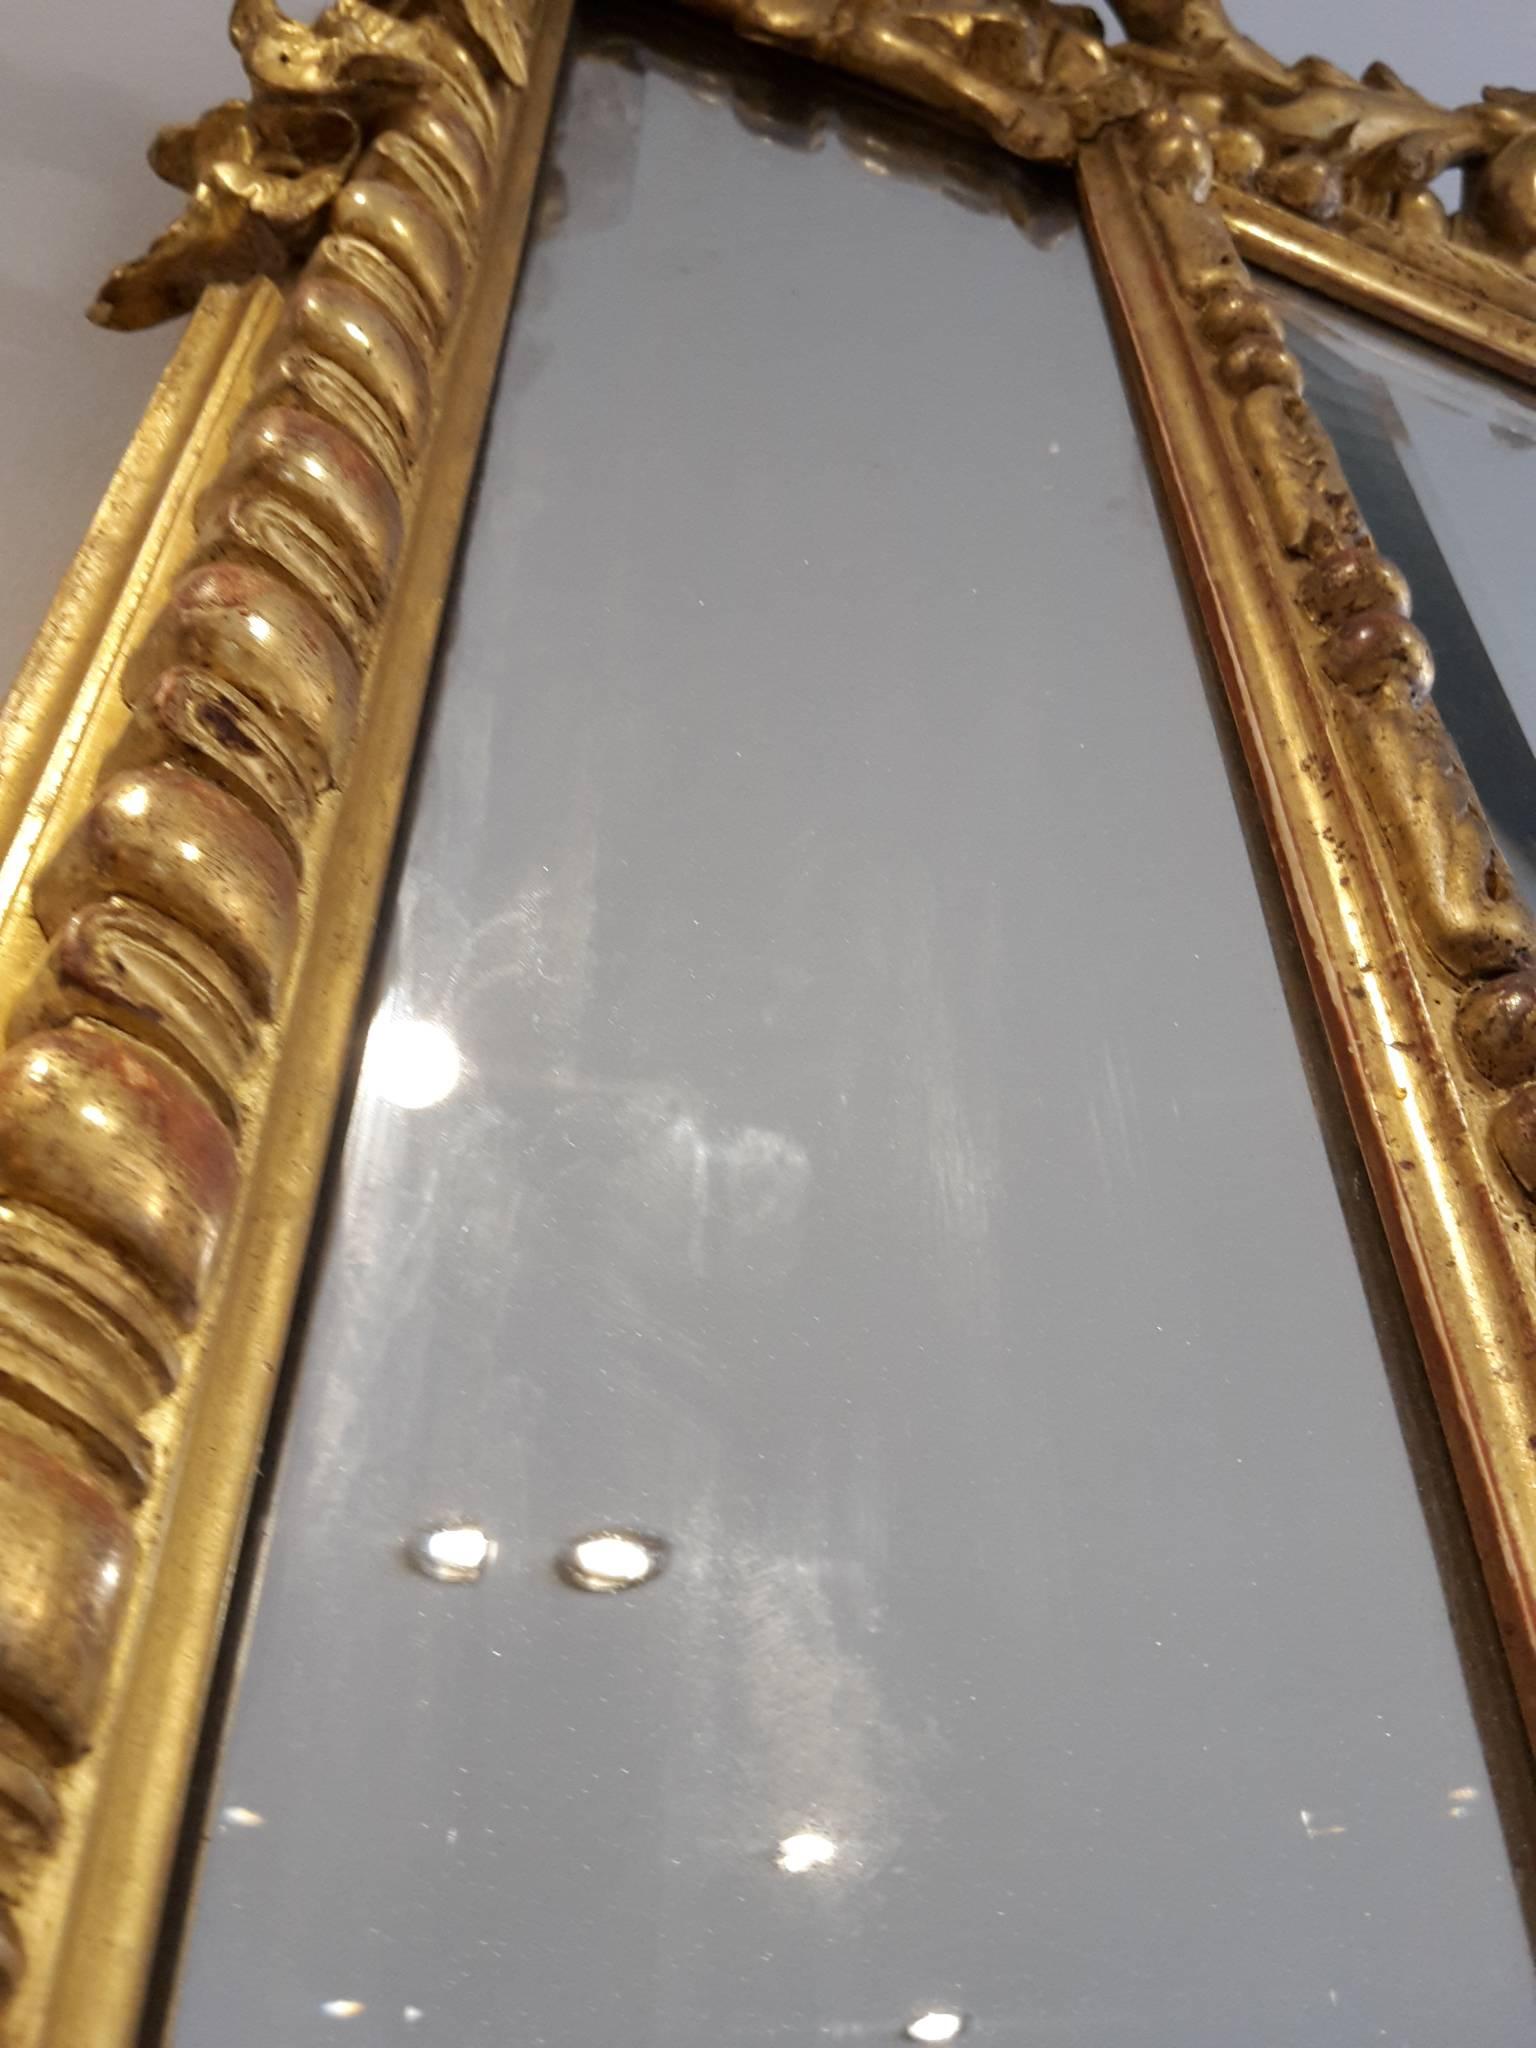 Giltwood mirror Napoleon III marginal frame with beveled mercury plates.
Each corners ornates with acanthus leaves and flowers, Louis XV style crest with an open shell design, nice sparkles mercury reflection.
    